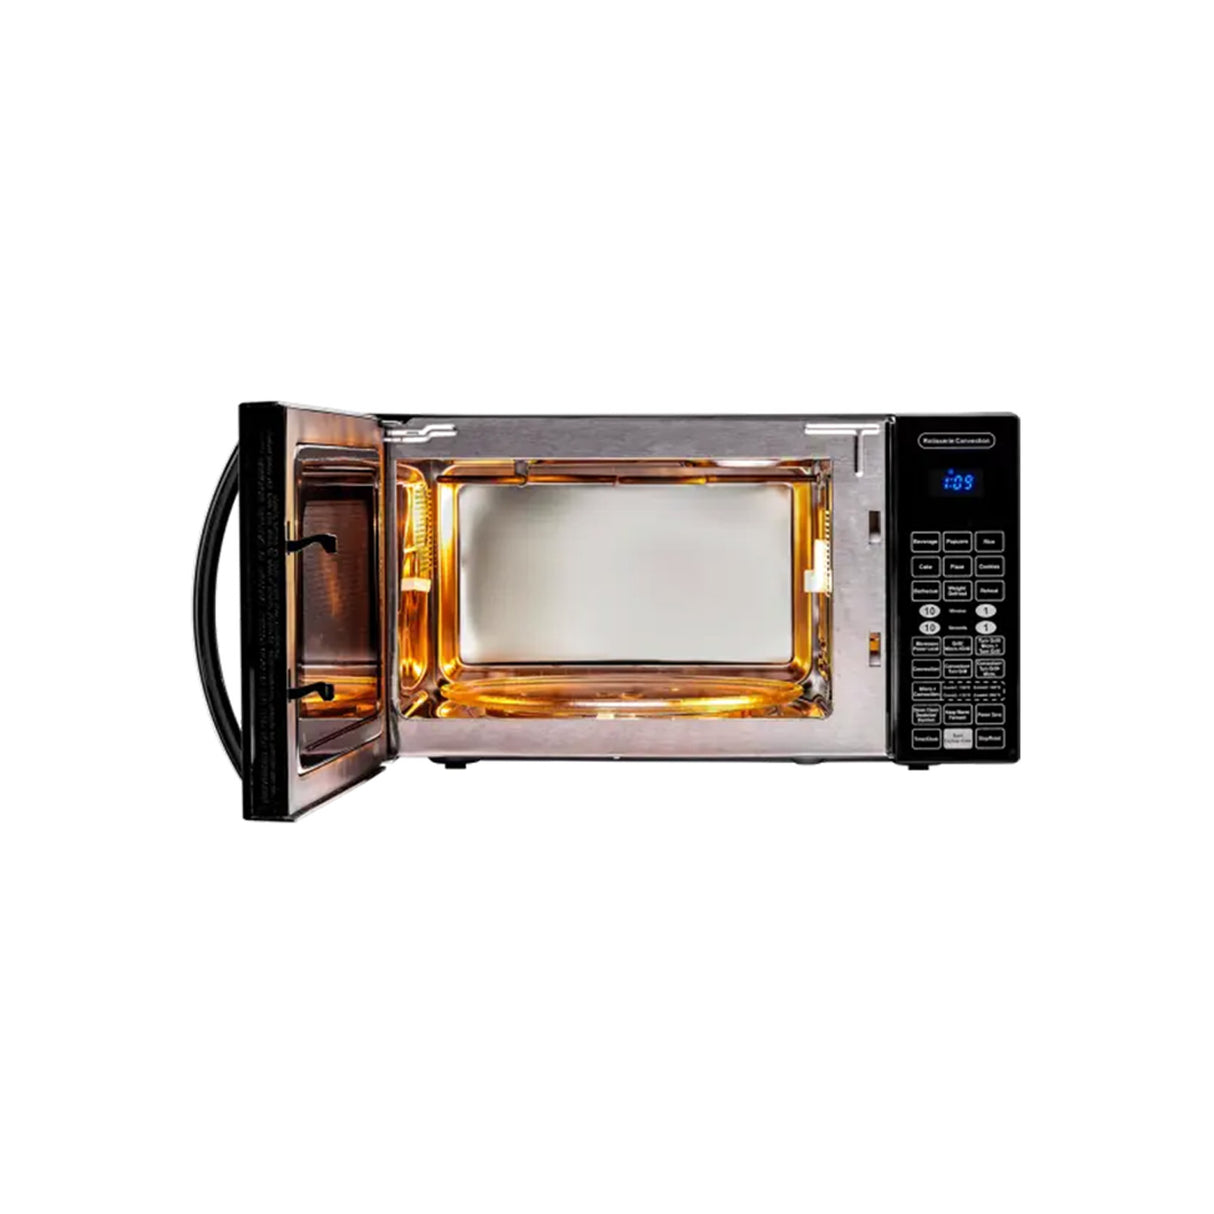 Effortless cooking with style in IFB 30FRC2 - 30 L black rotisserie convection microwave.